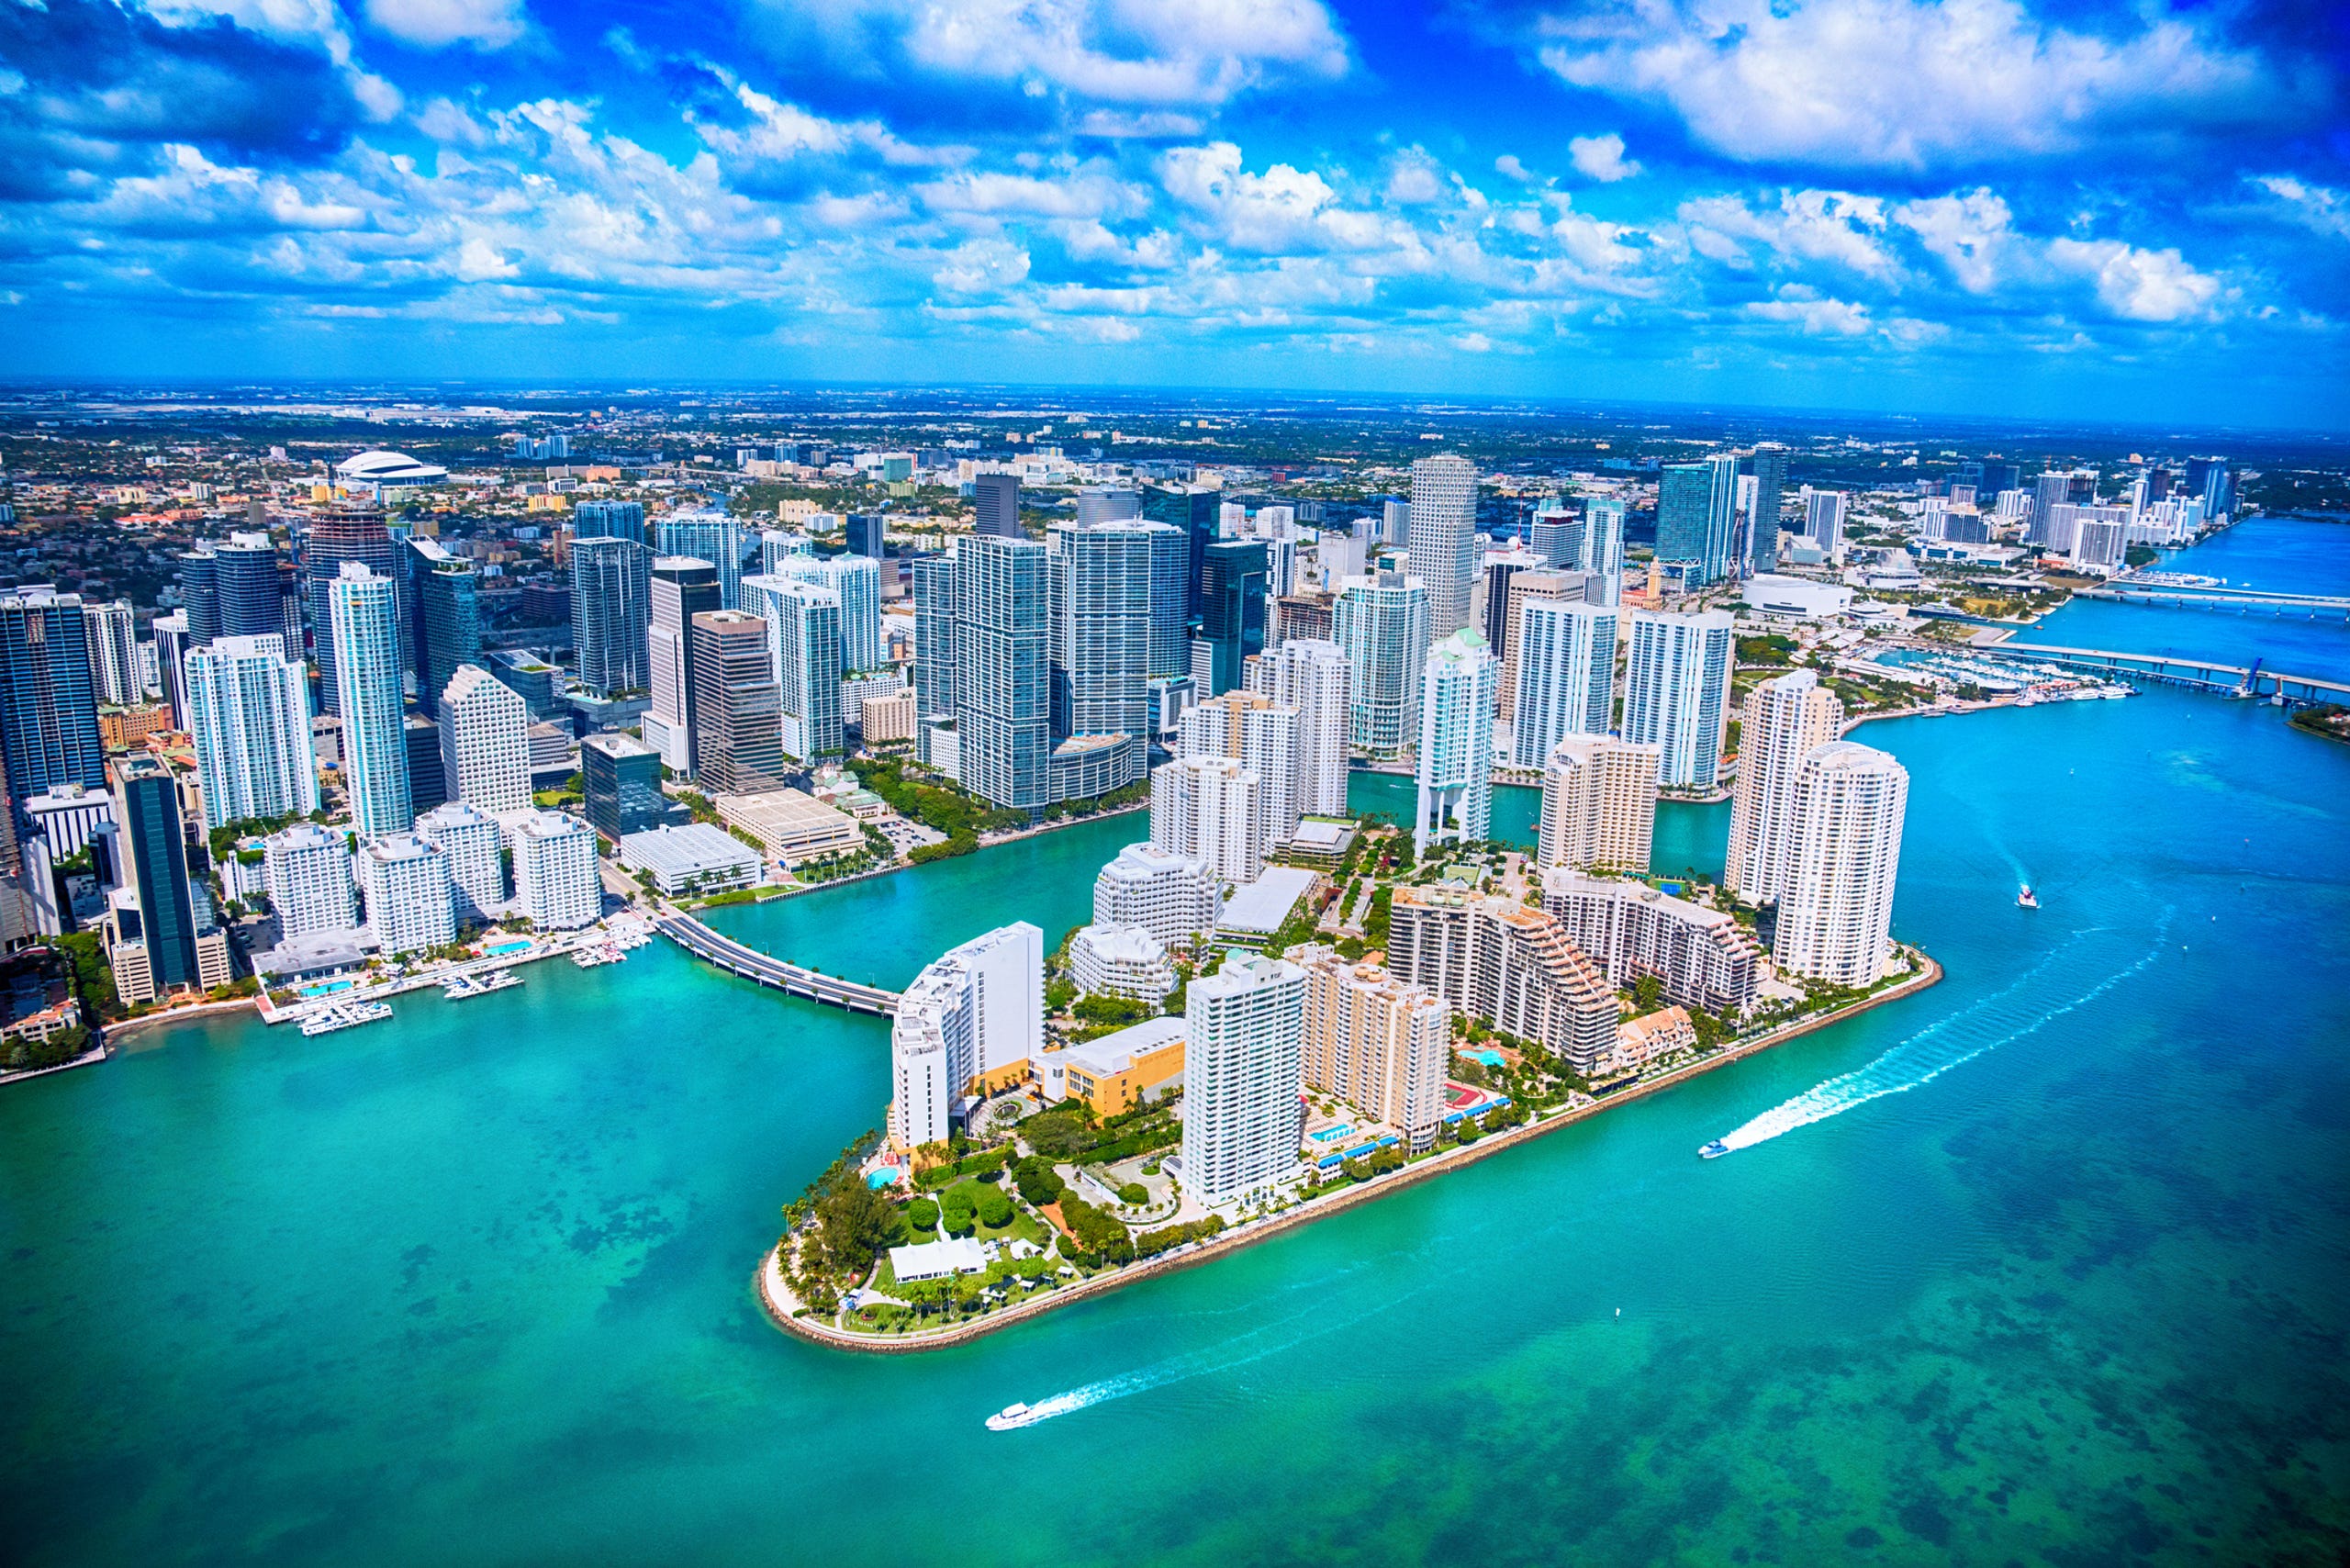 20 Interesting Facts About Miami